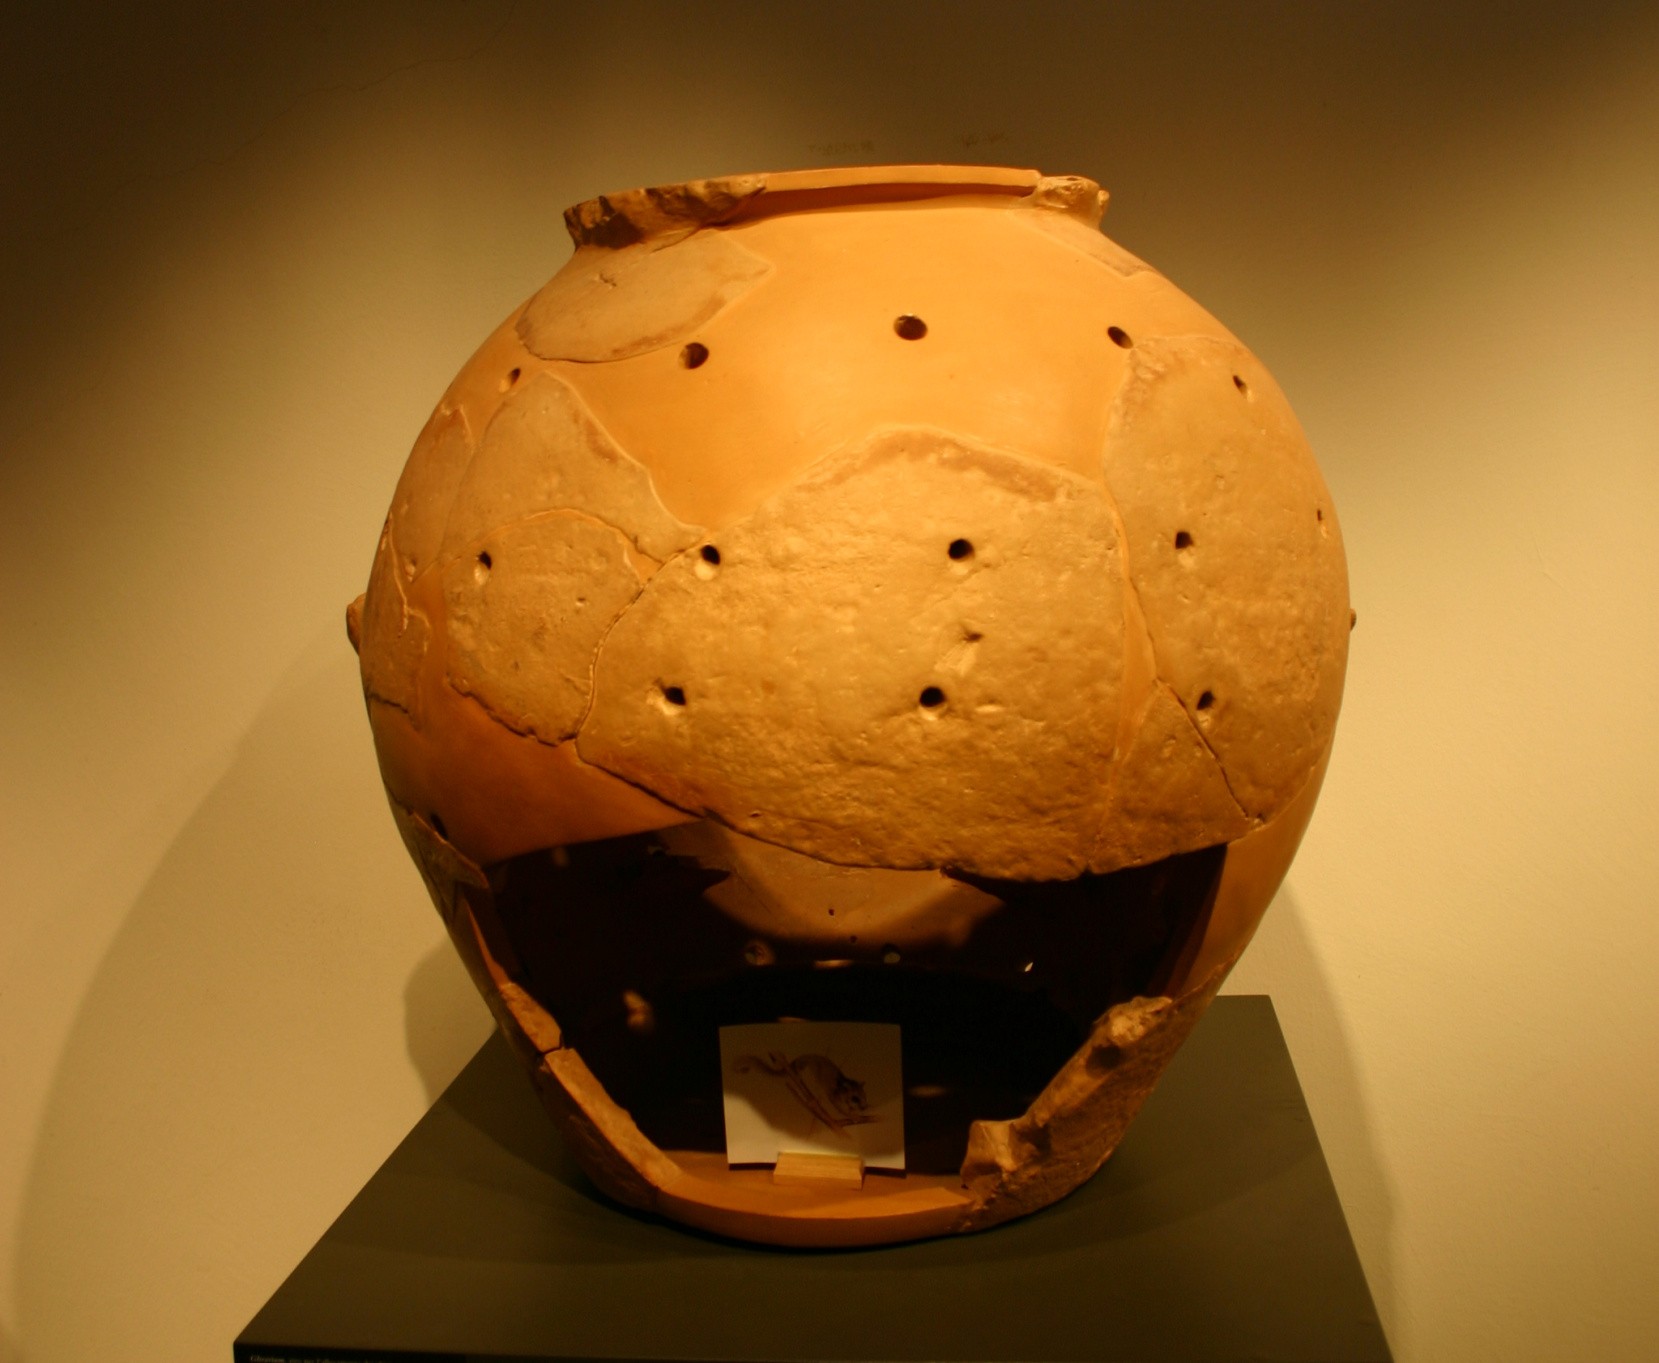 A glirarium is a terracotta container used for keeping edible dormice. These animals were considered a delicacy in the Etruscan period and later in the Roman Empire.